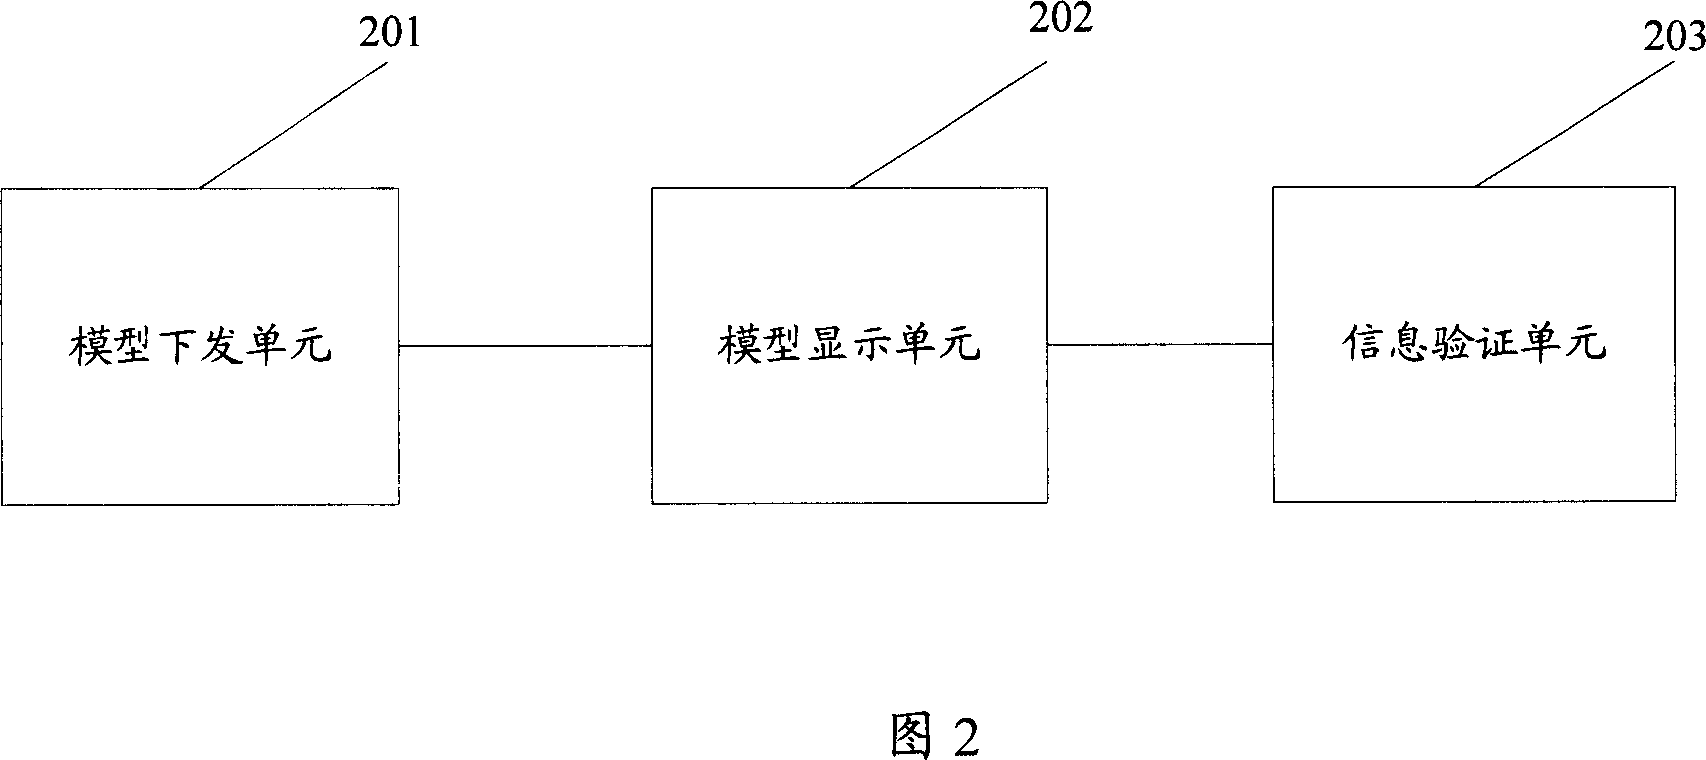 Network user identification authentication method and system